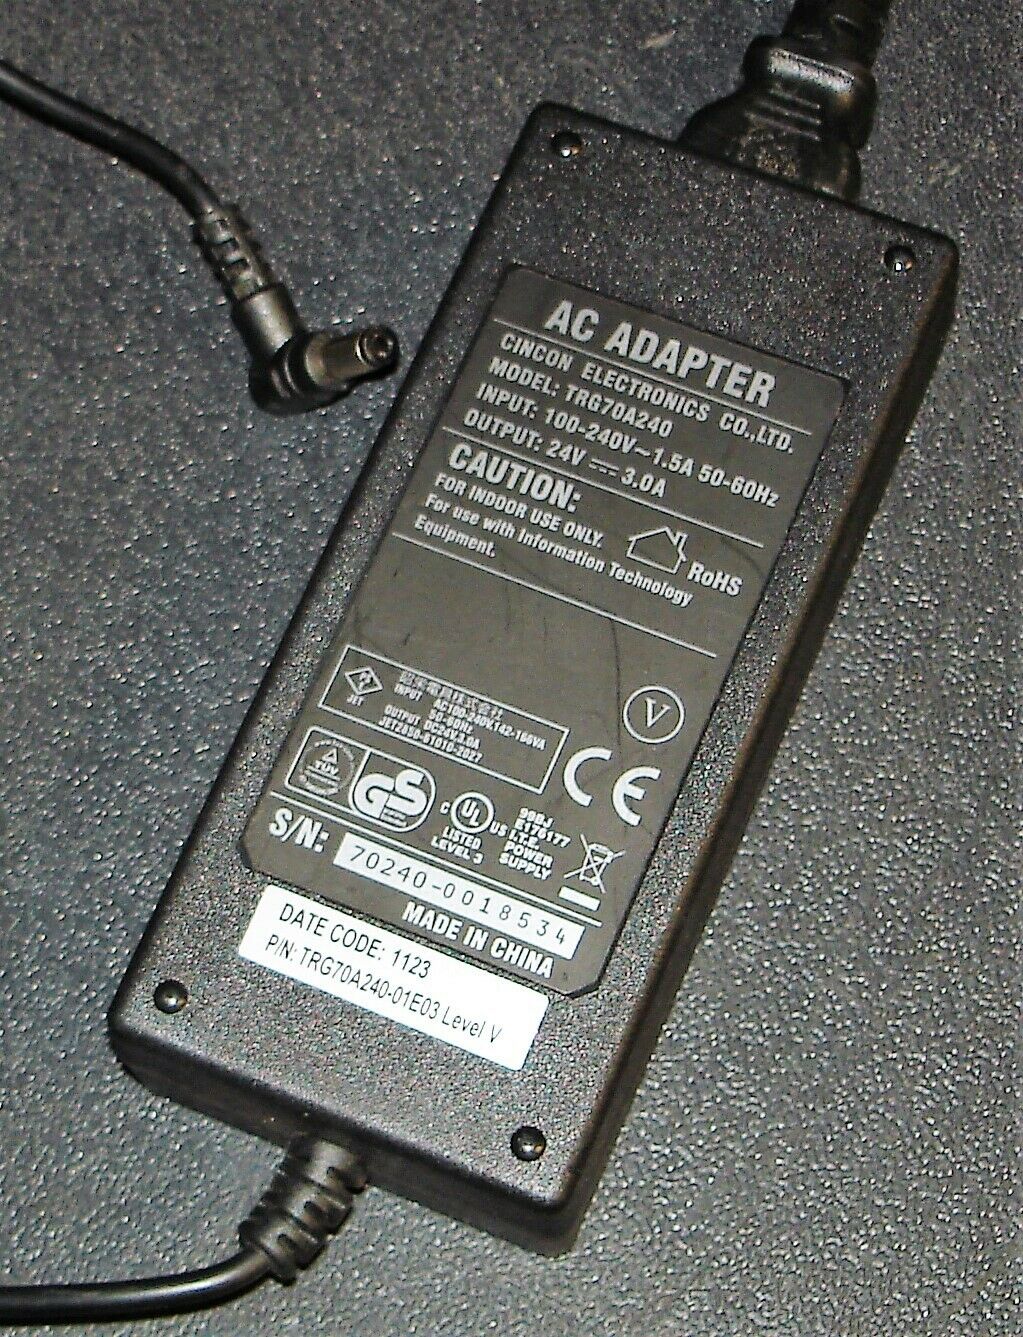 NEW CINCON TRG70A240 AC ADAPTER 24V 3.0A POWER SUPPLY